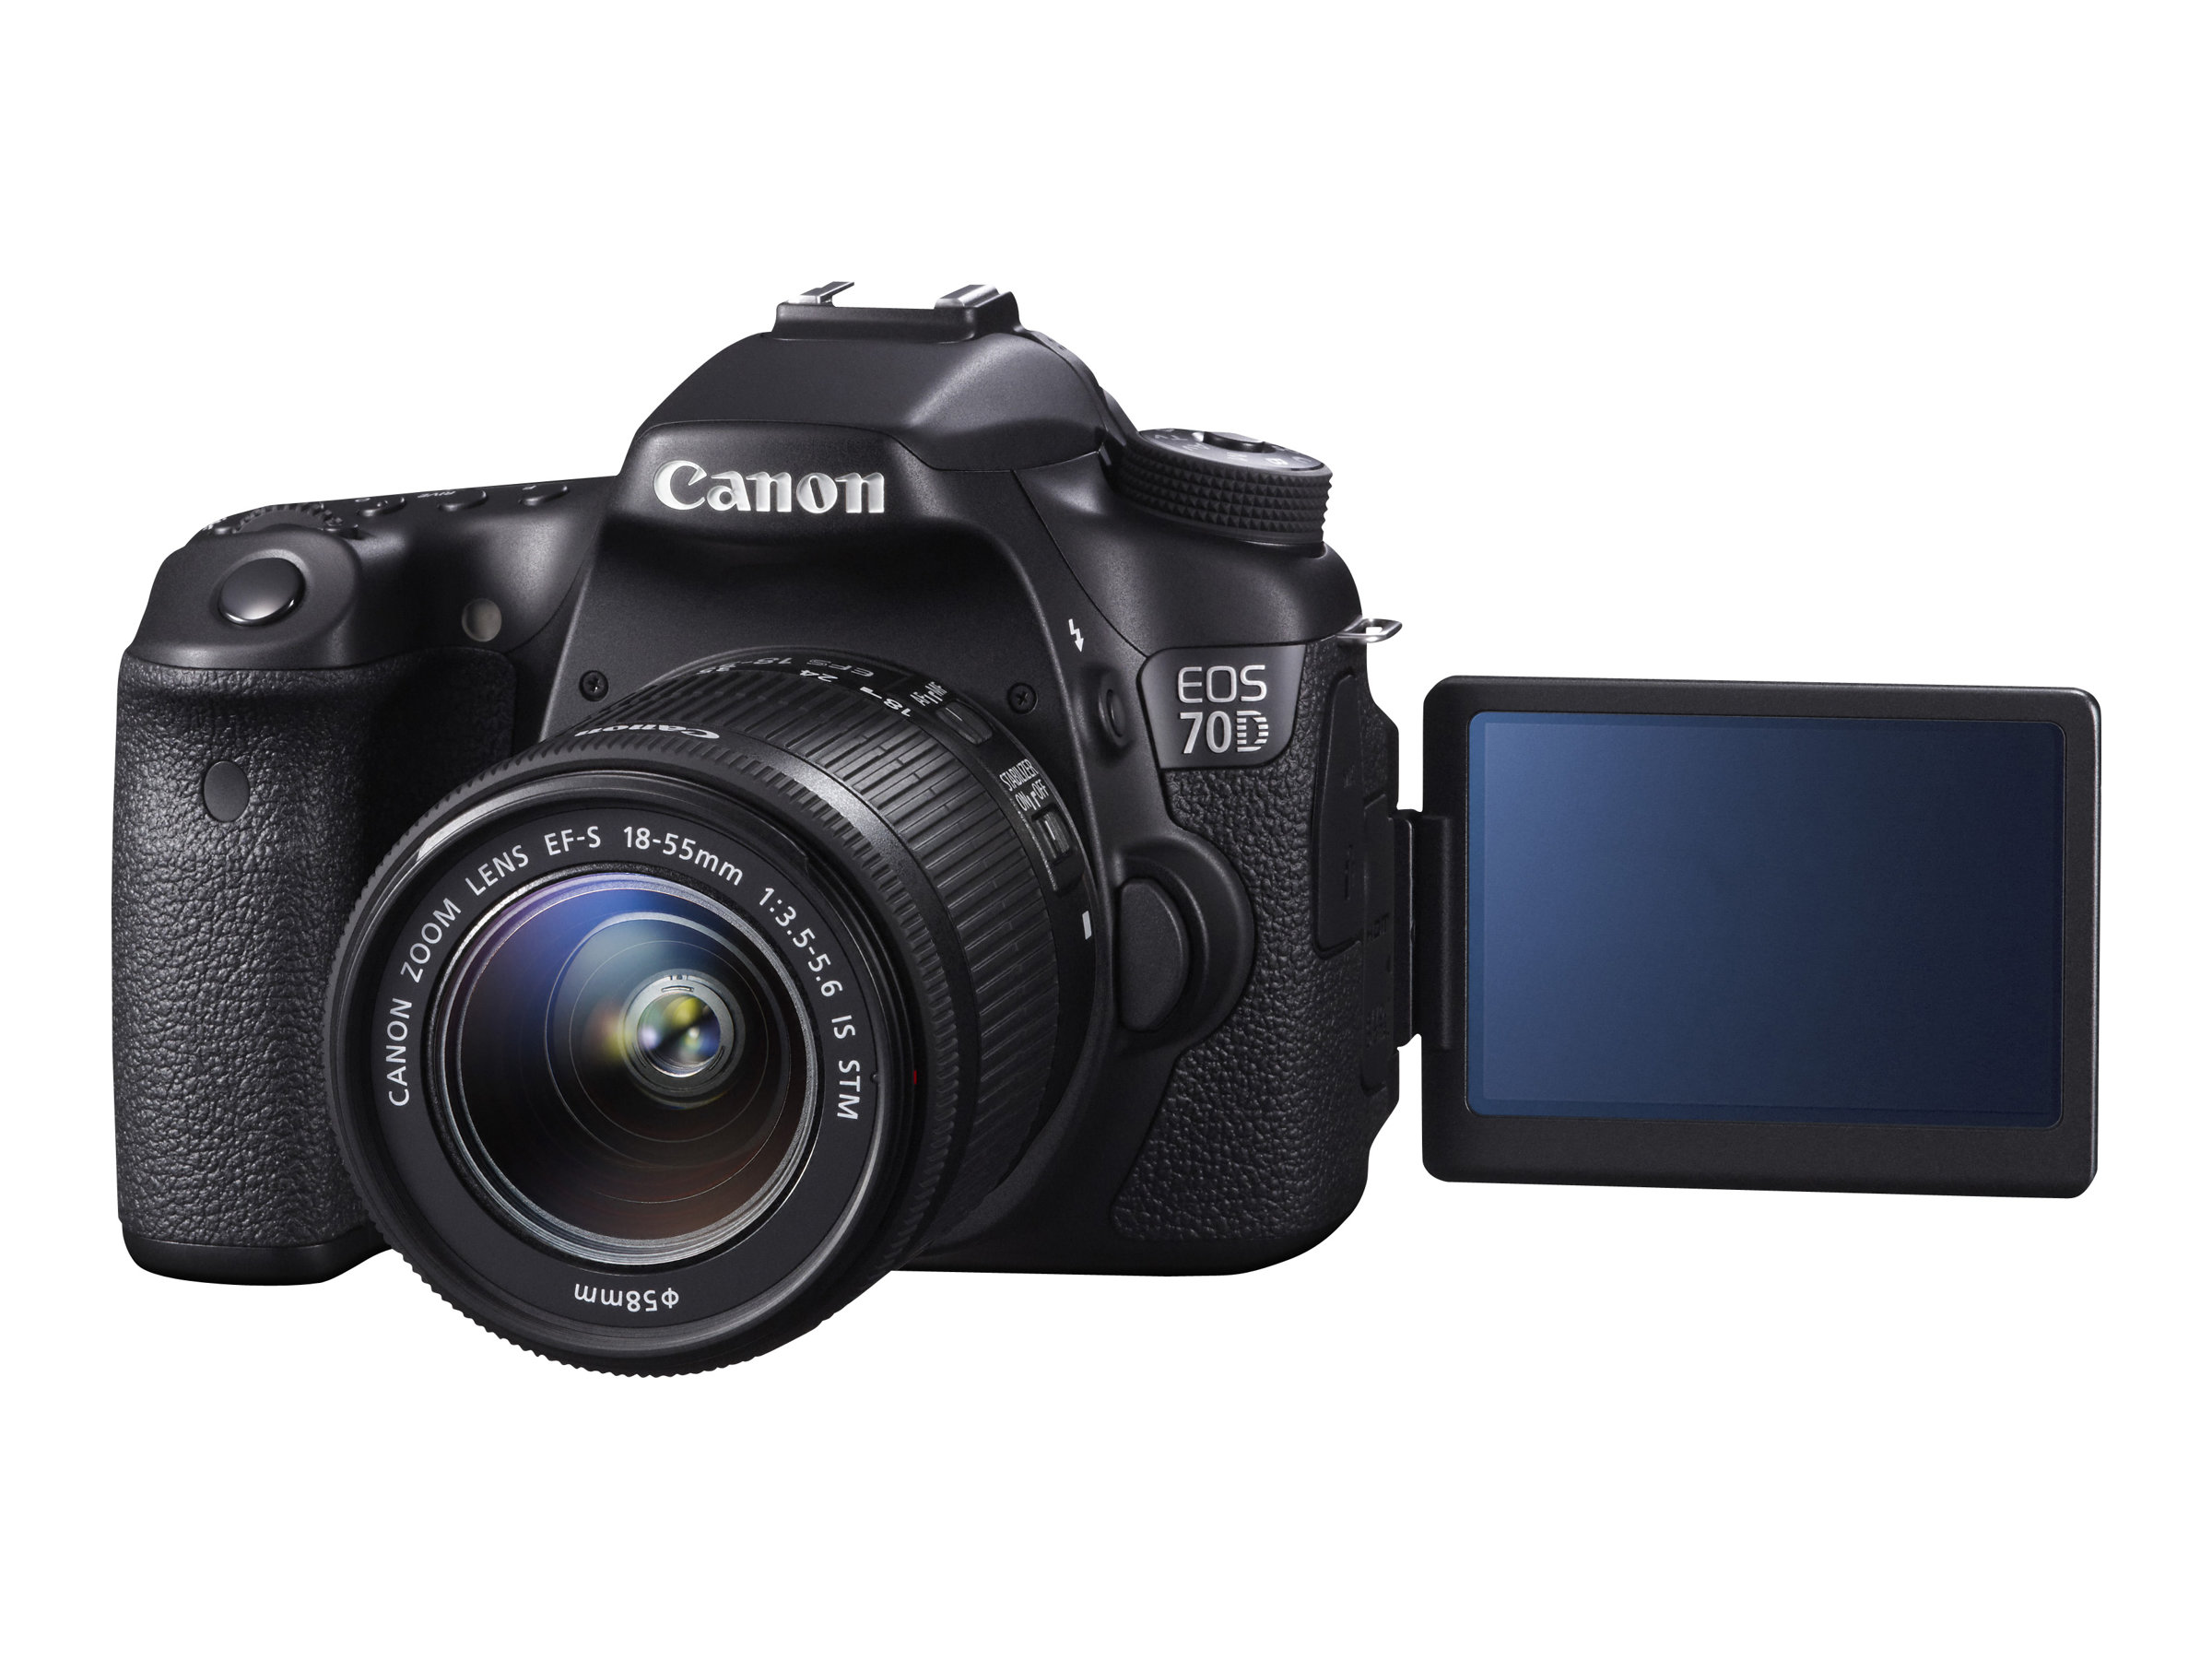 Canon EOS 70D - Digital camera - SLR - 20.2 MP - APS-C - 1080p - 7.5x optical zoom EF-S 18-135mm IS STM lens - Wi-Fi - image 2 of 15